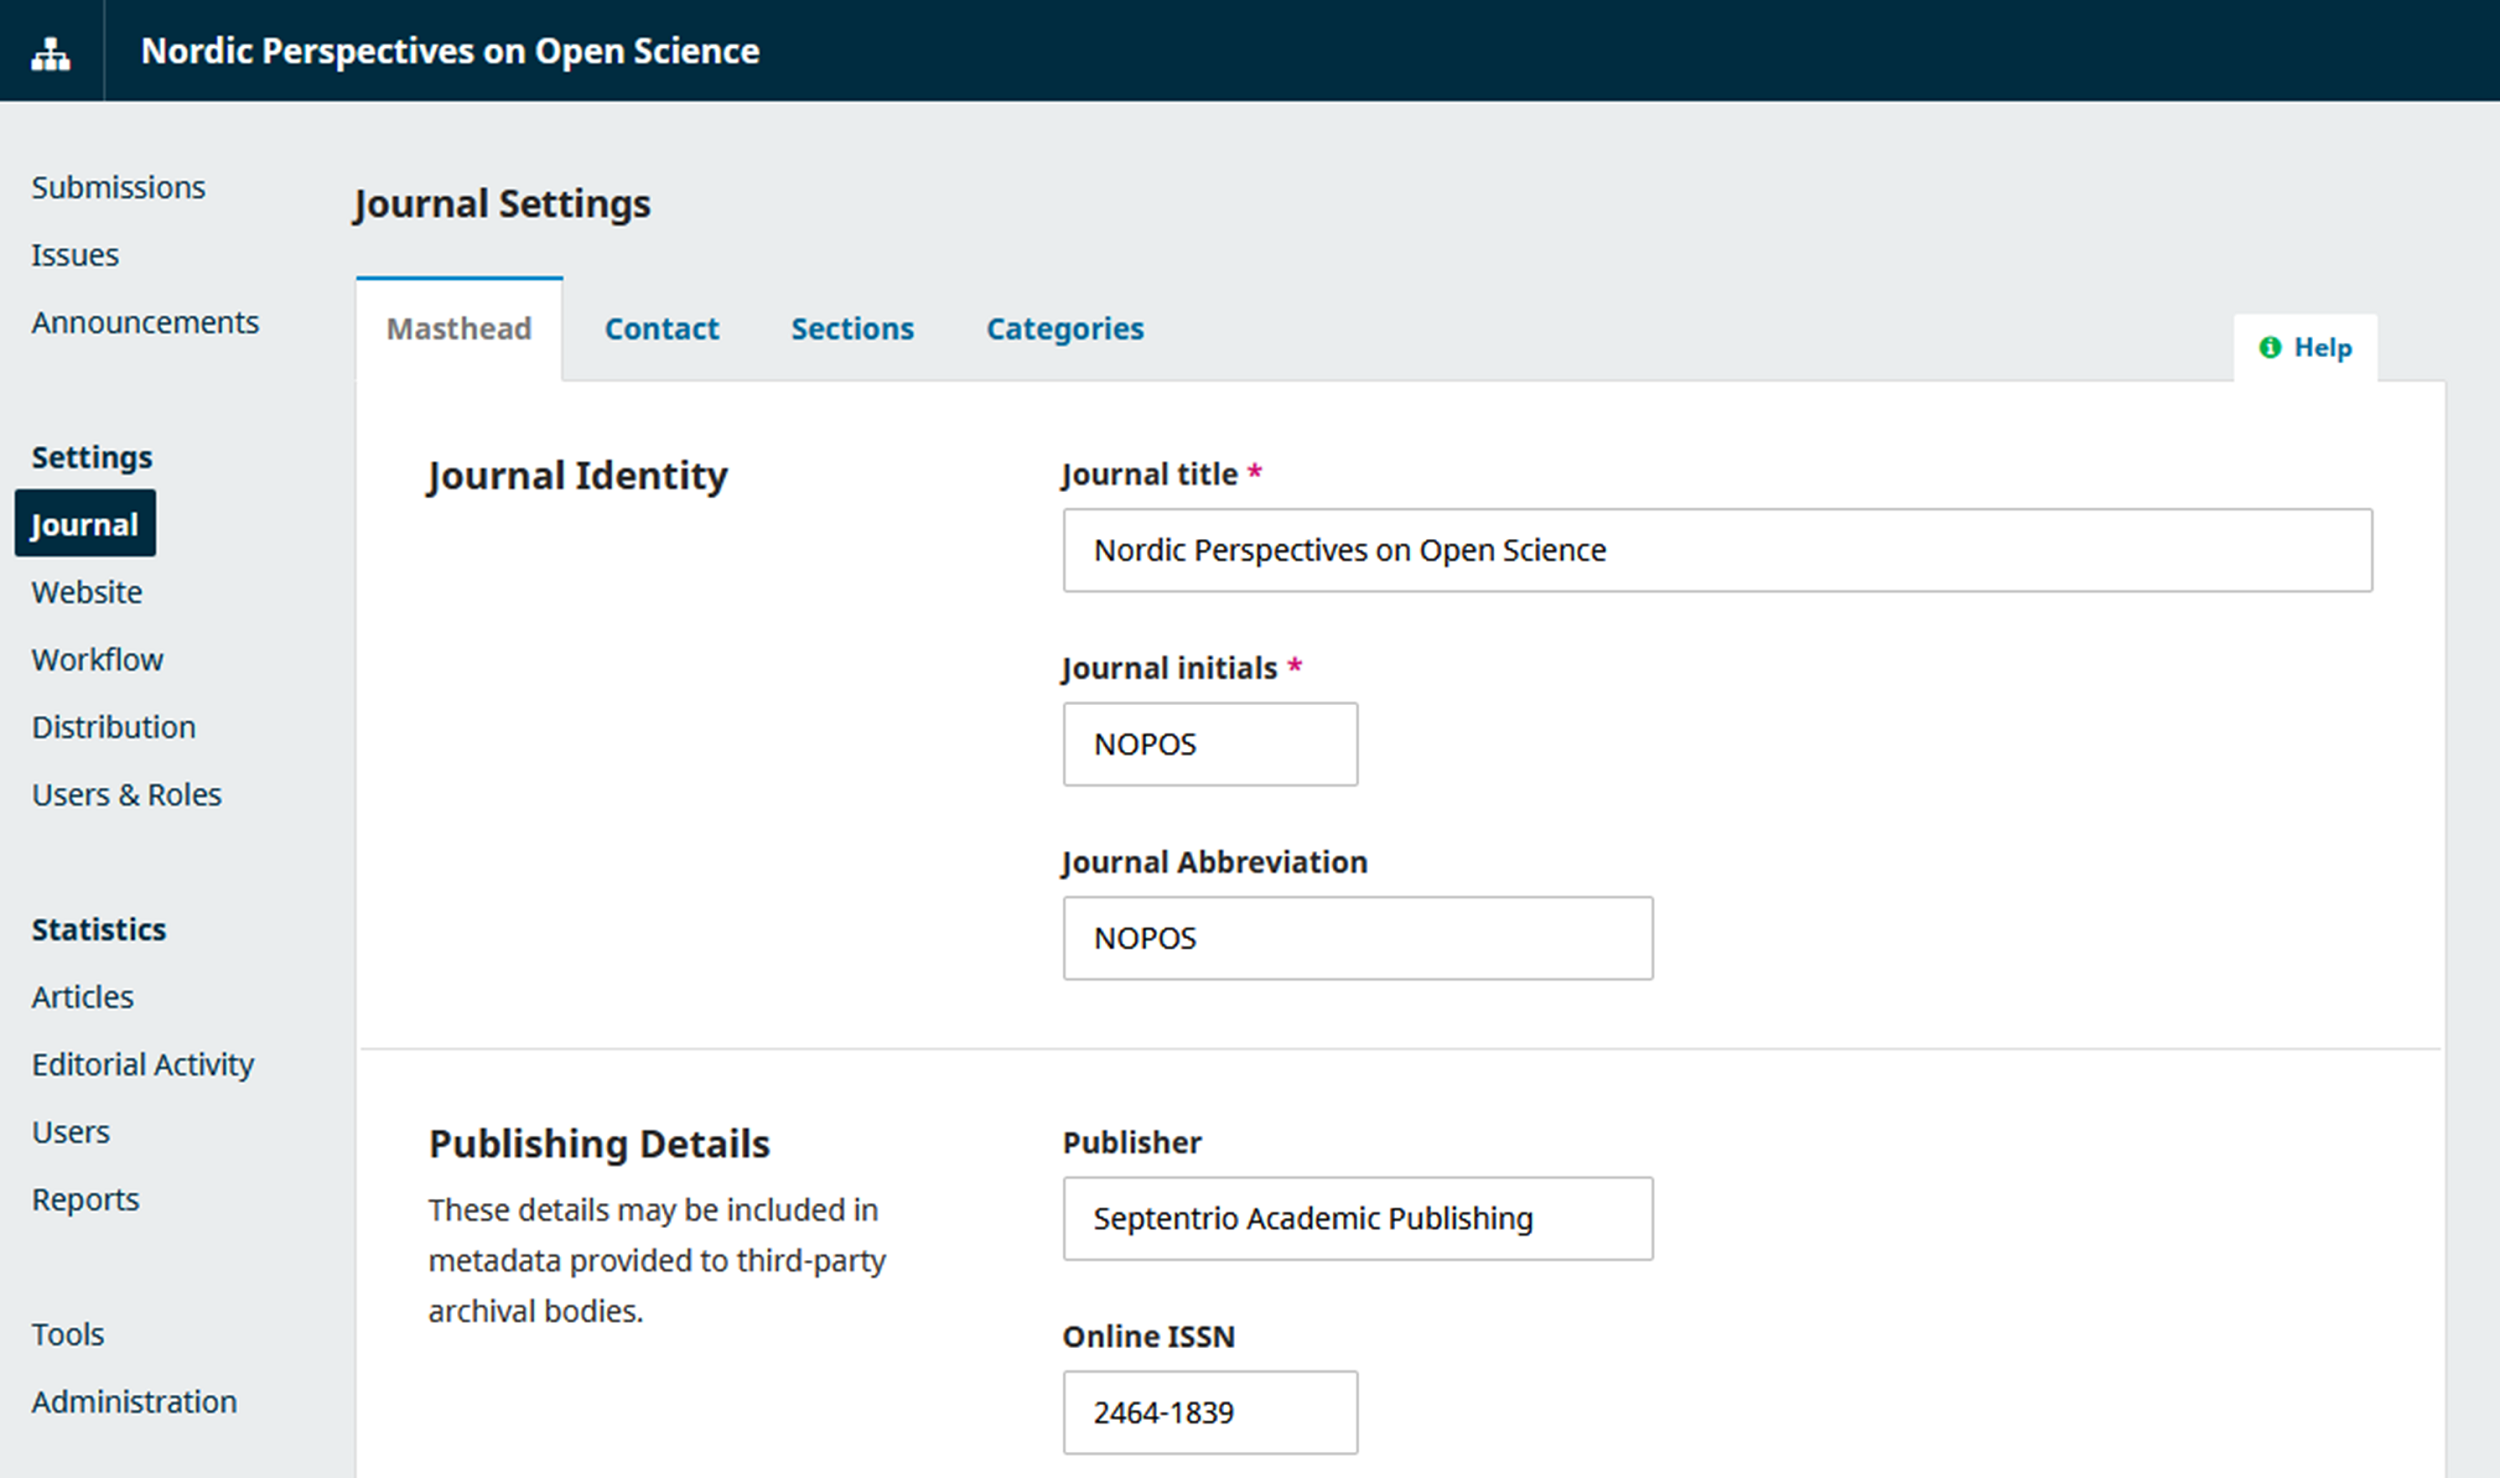 Screenshot showing journal settings in the OJS editorial interface.